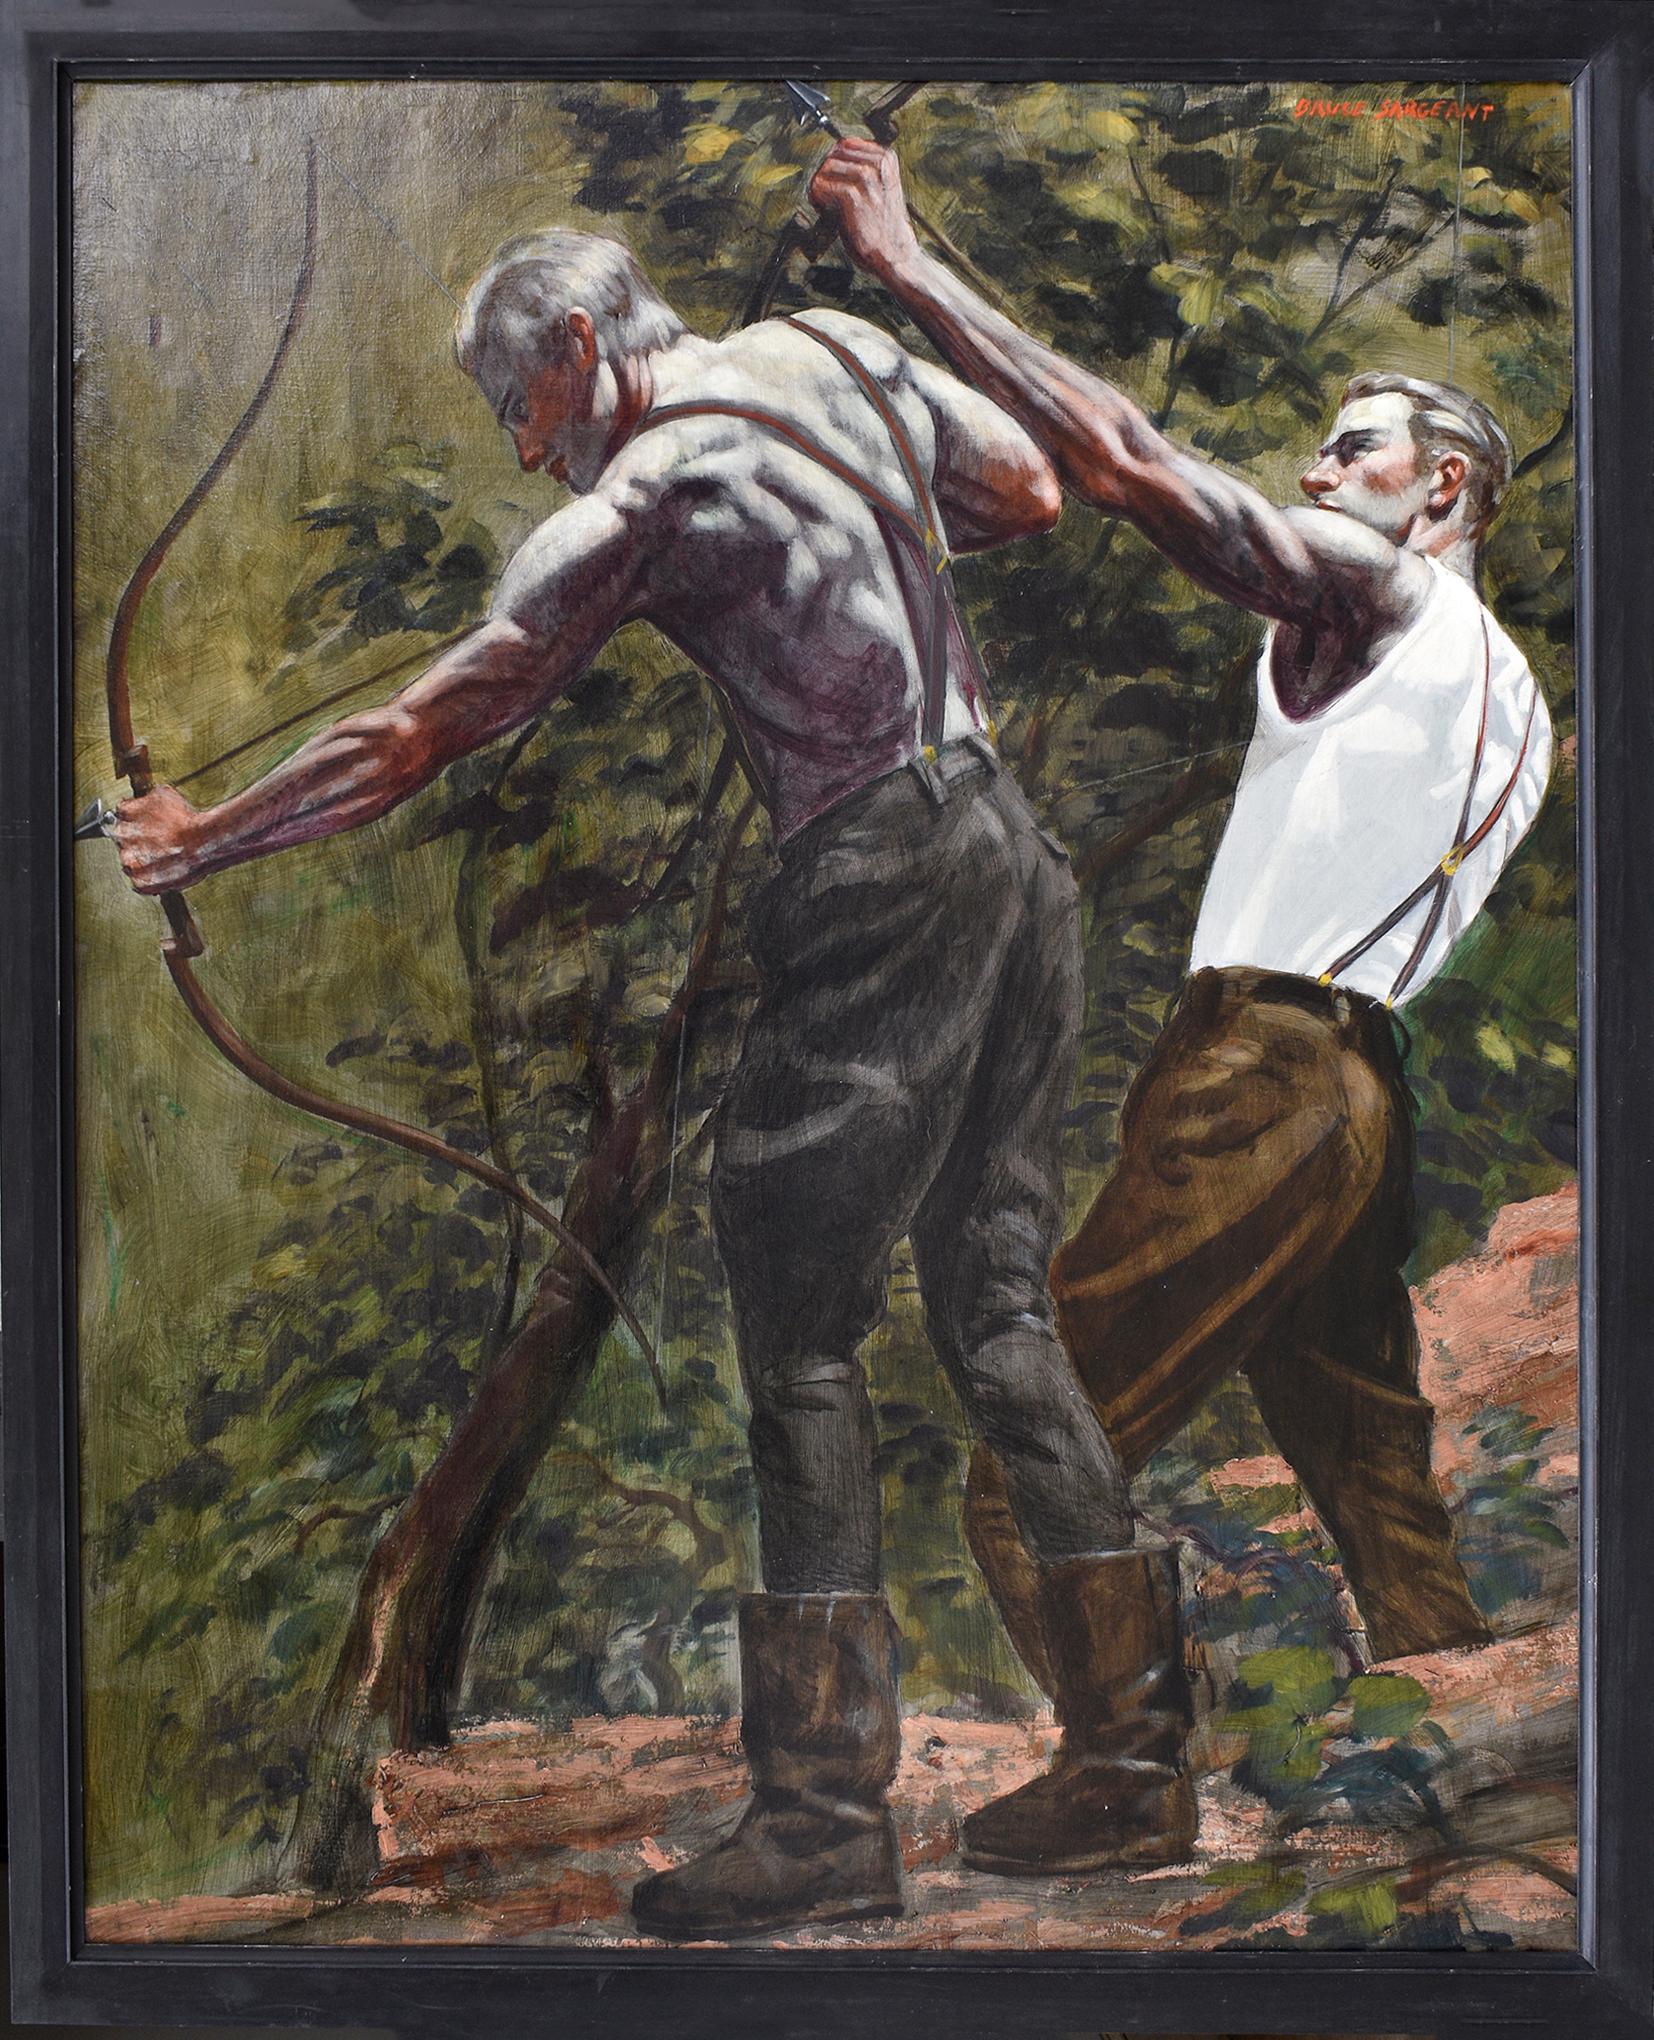 Archers: Academic Figurative Painting of Two Men Bow Hunting by Mark Beard